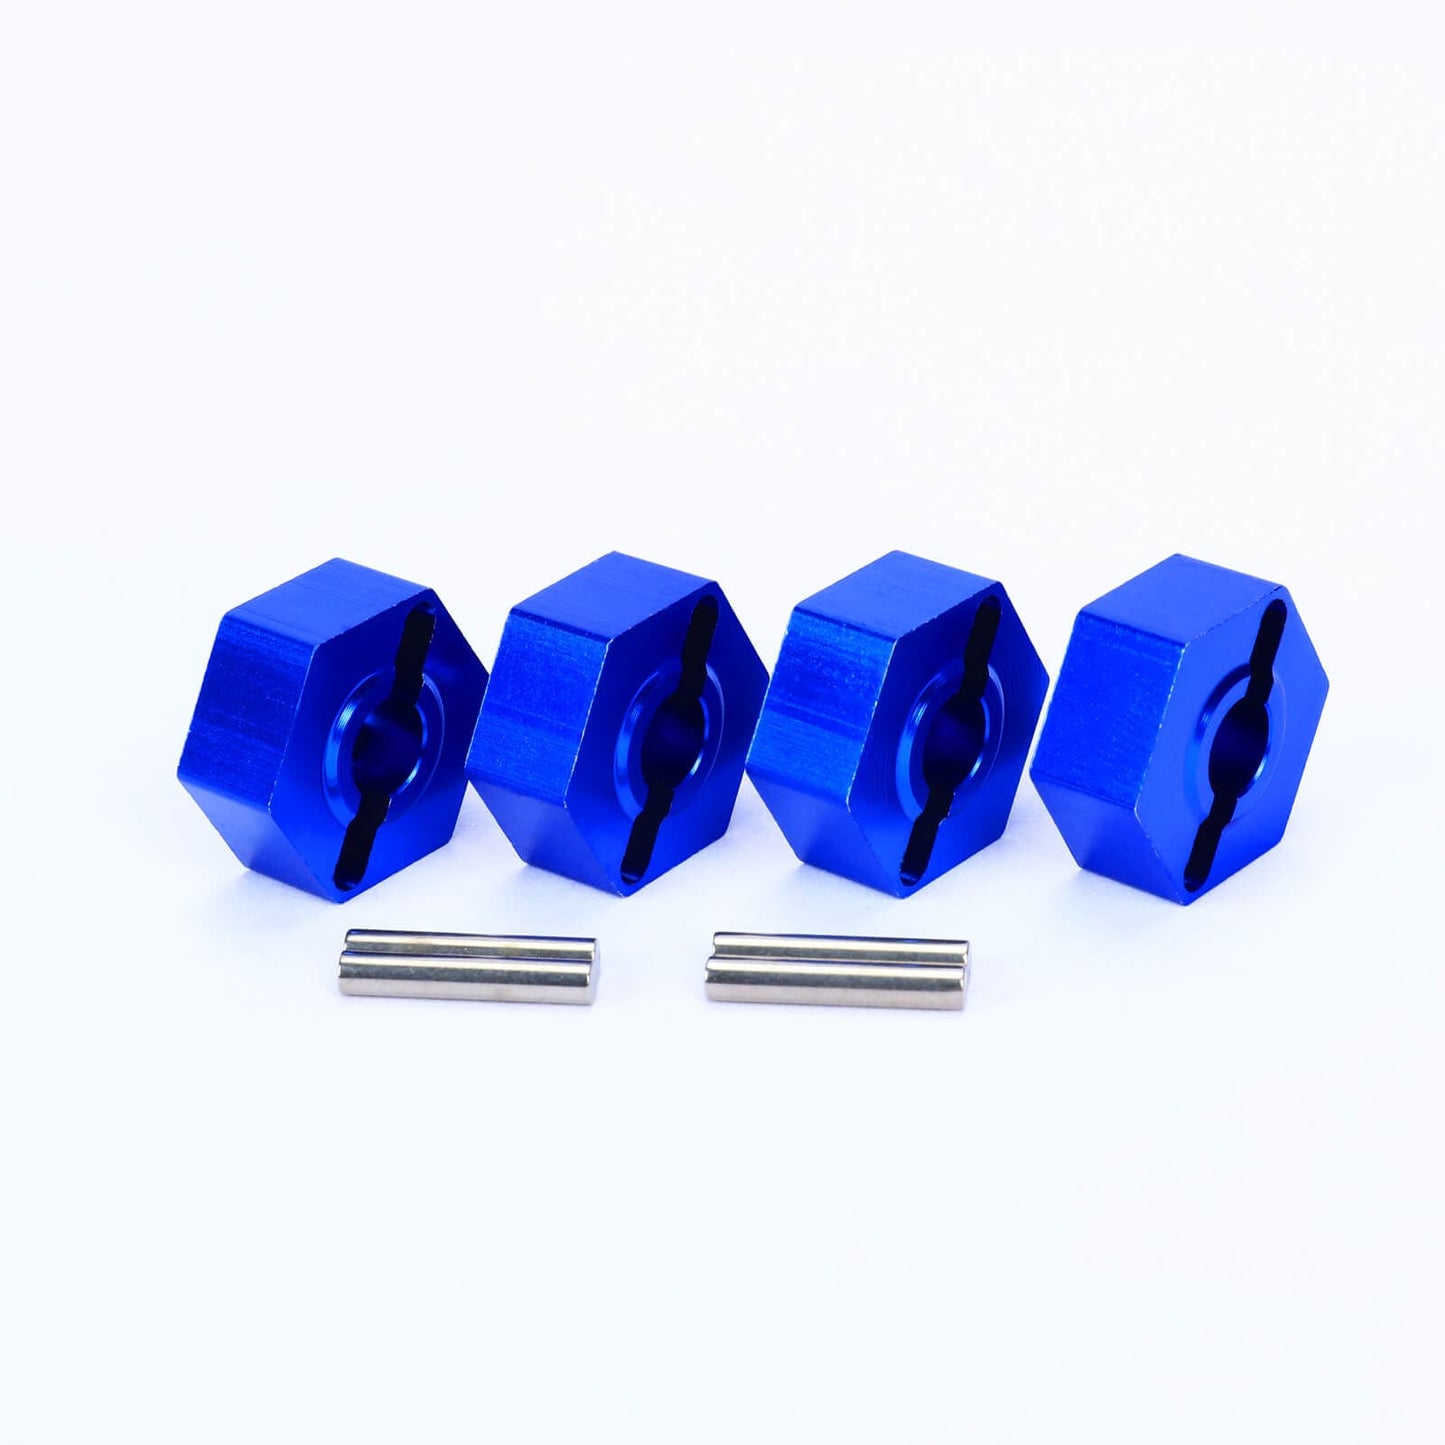 RCAWD LOSI 1/8 LMT RCAWD Losi Upgrades 17mm Hex Adapter with Screwpin for1/8 LMT LOS242053